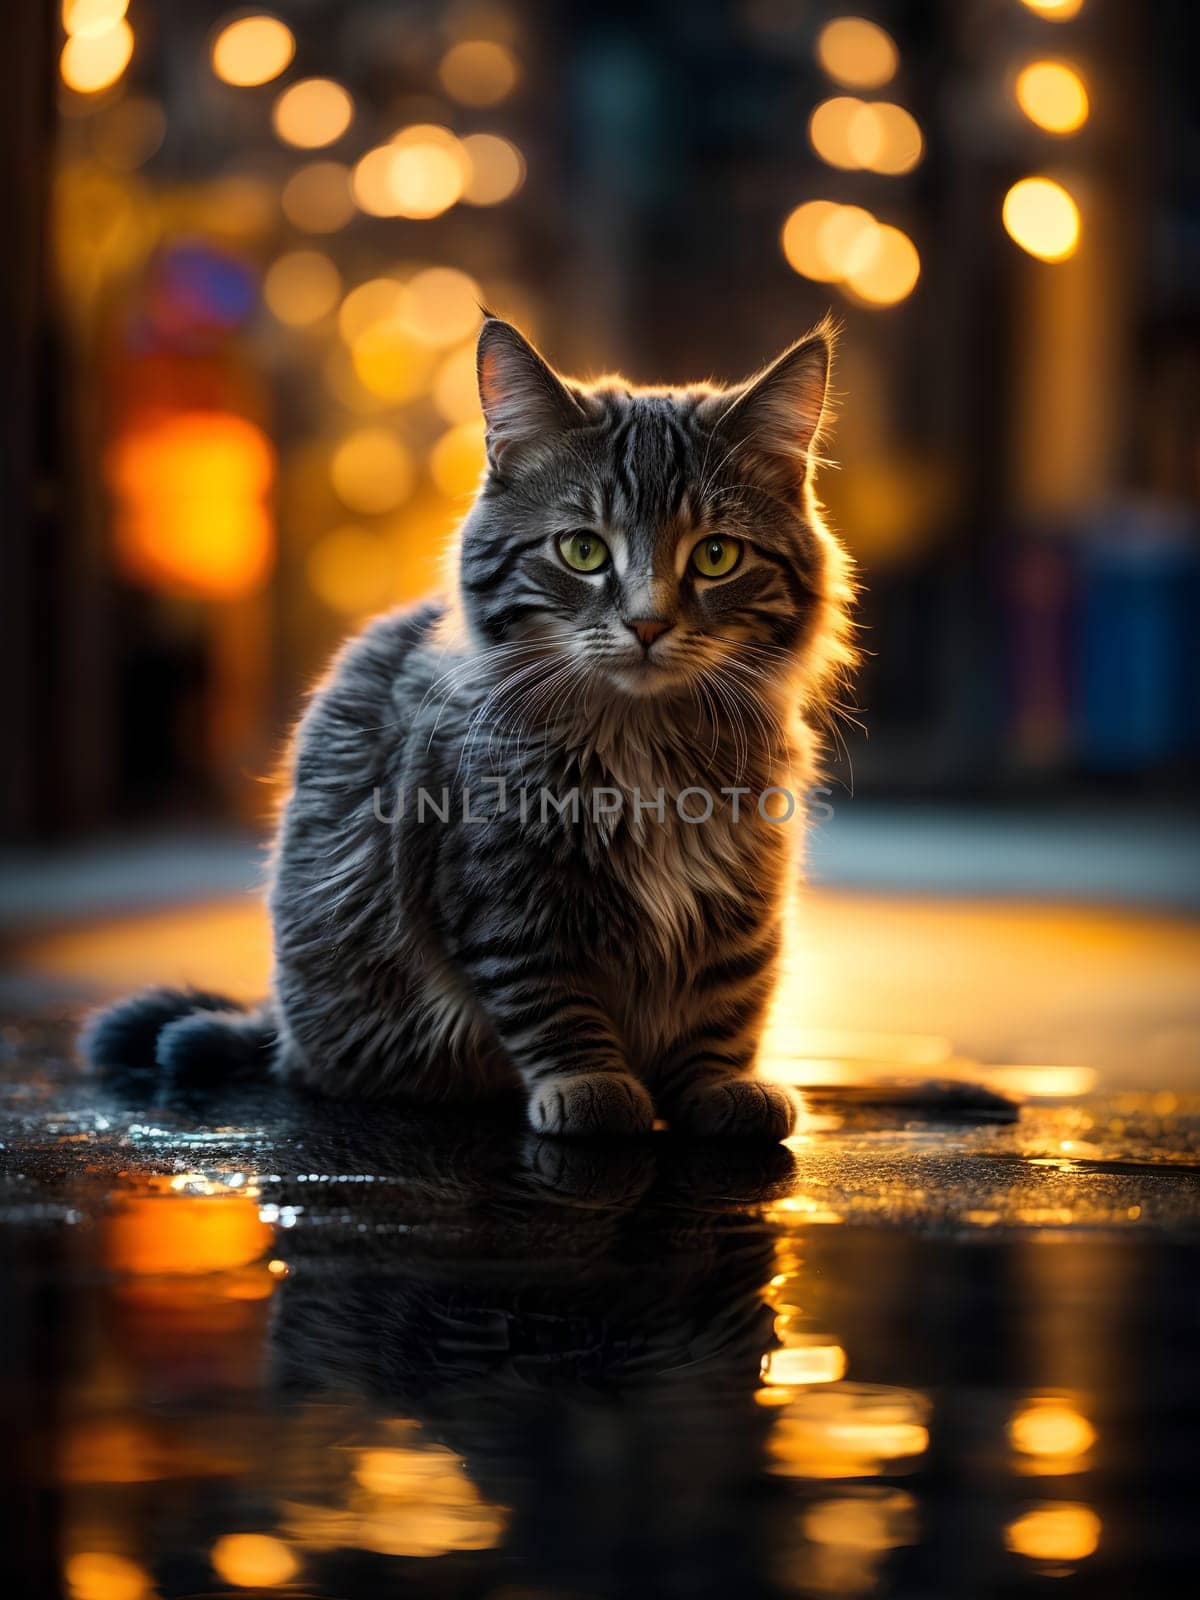 A cat sits on a reflective surface by Севостьянов